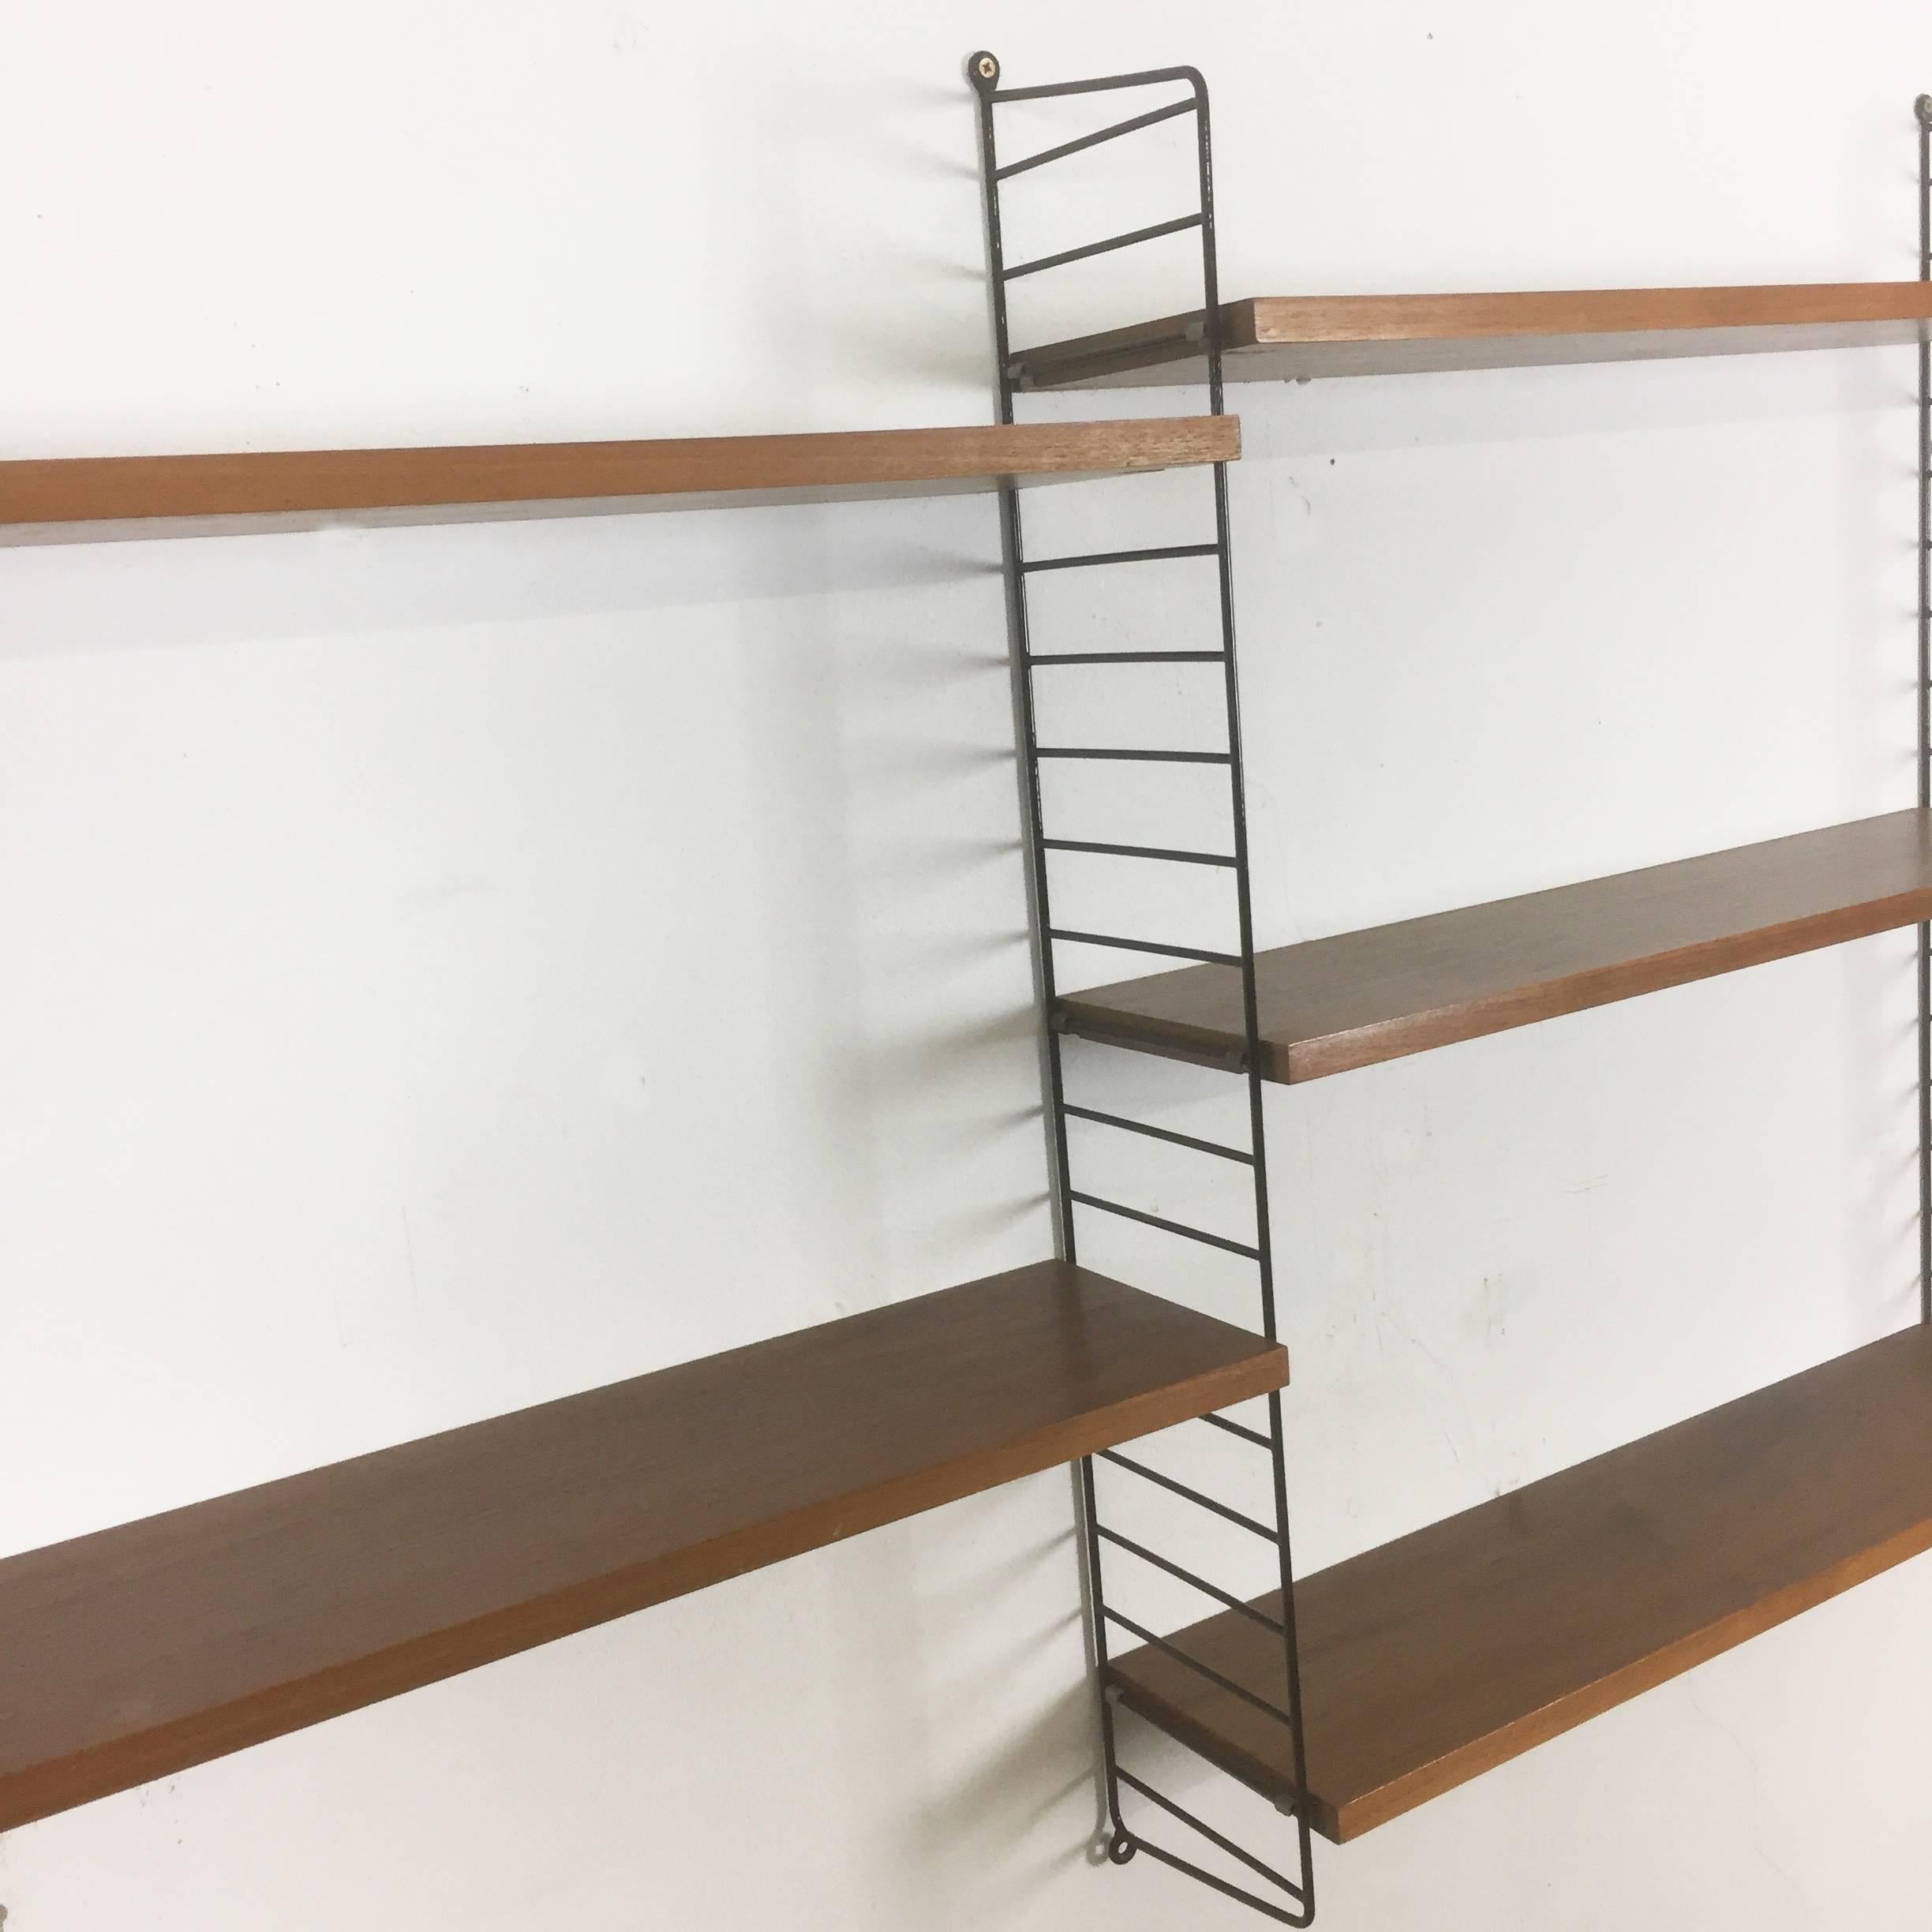 String Regal wall unit

Made in Sweden

Bokhyllan ’The Ladder Shelf’

Design: Nils und Kajsa Strinning, 1949

The architect Nisse Strinning was born in 1917. From 1940-1947 he studied architecture in Stockholm, before he designed the